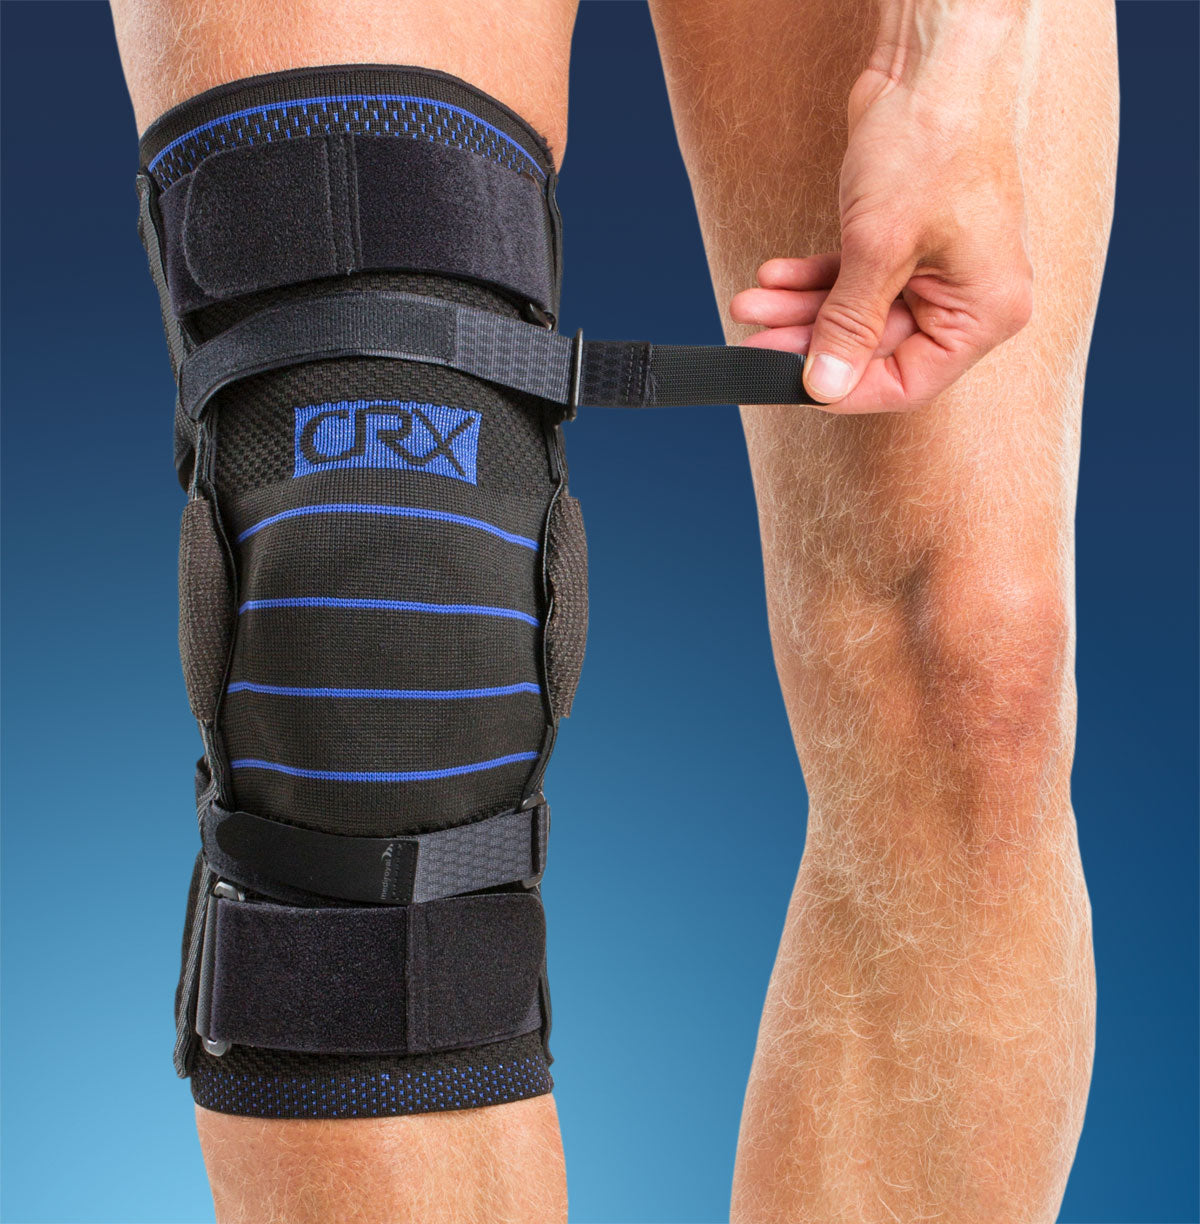 Knee braces for moderate to severe grades of injury